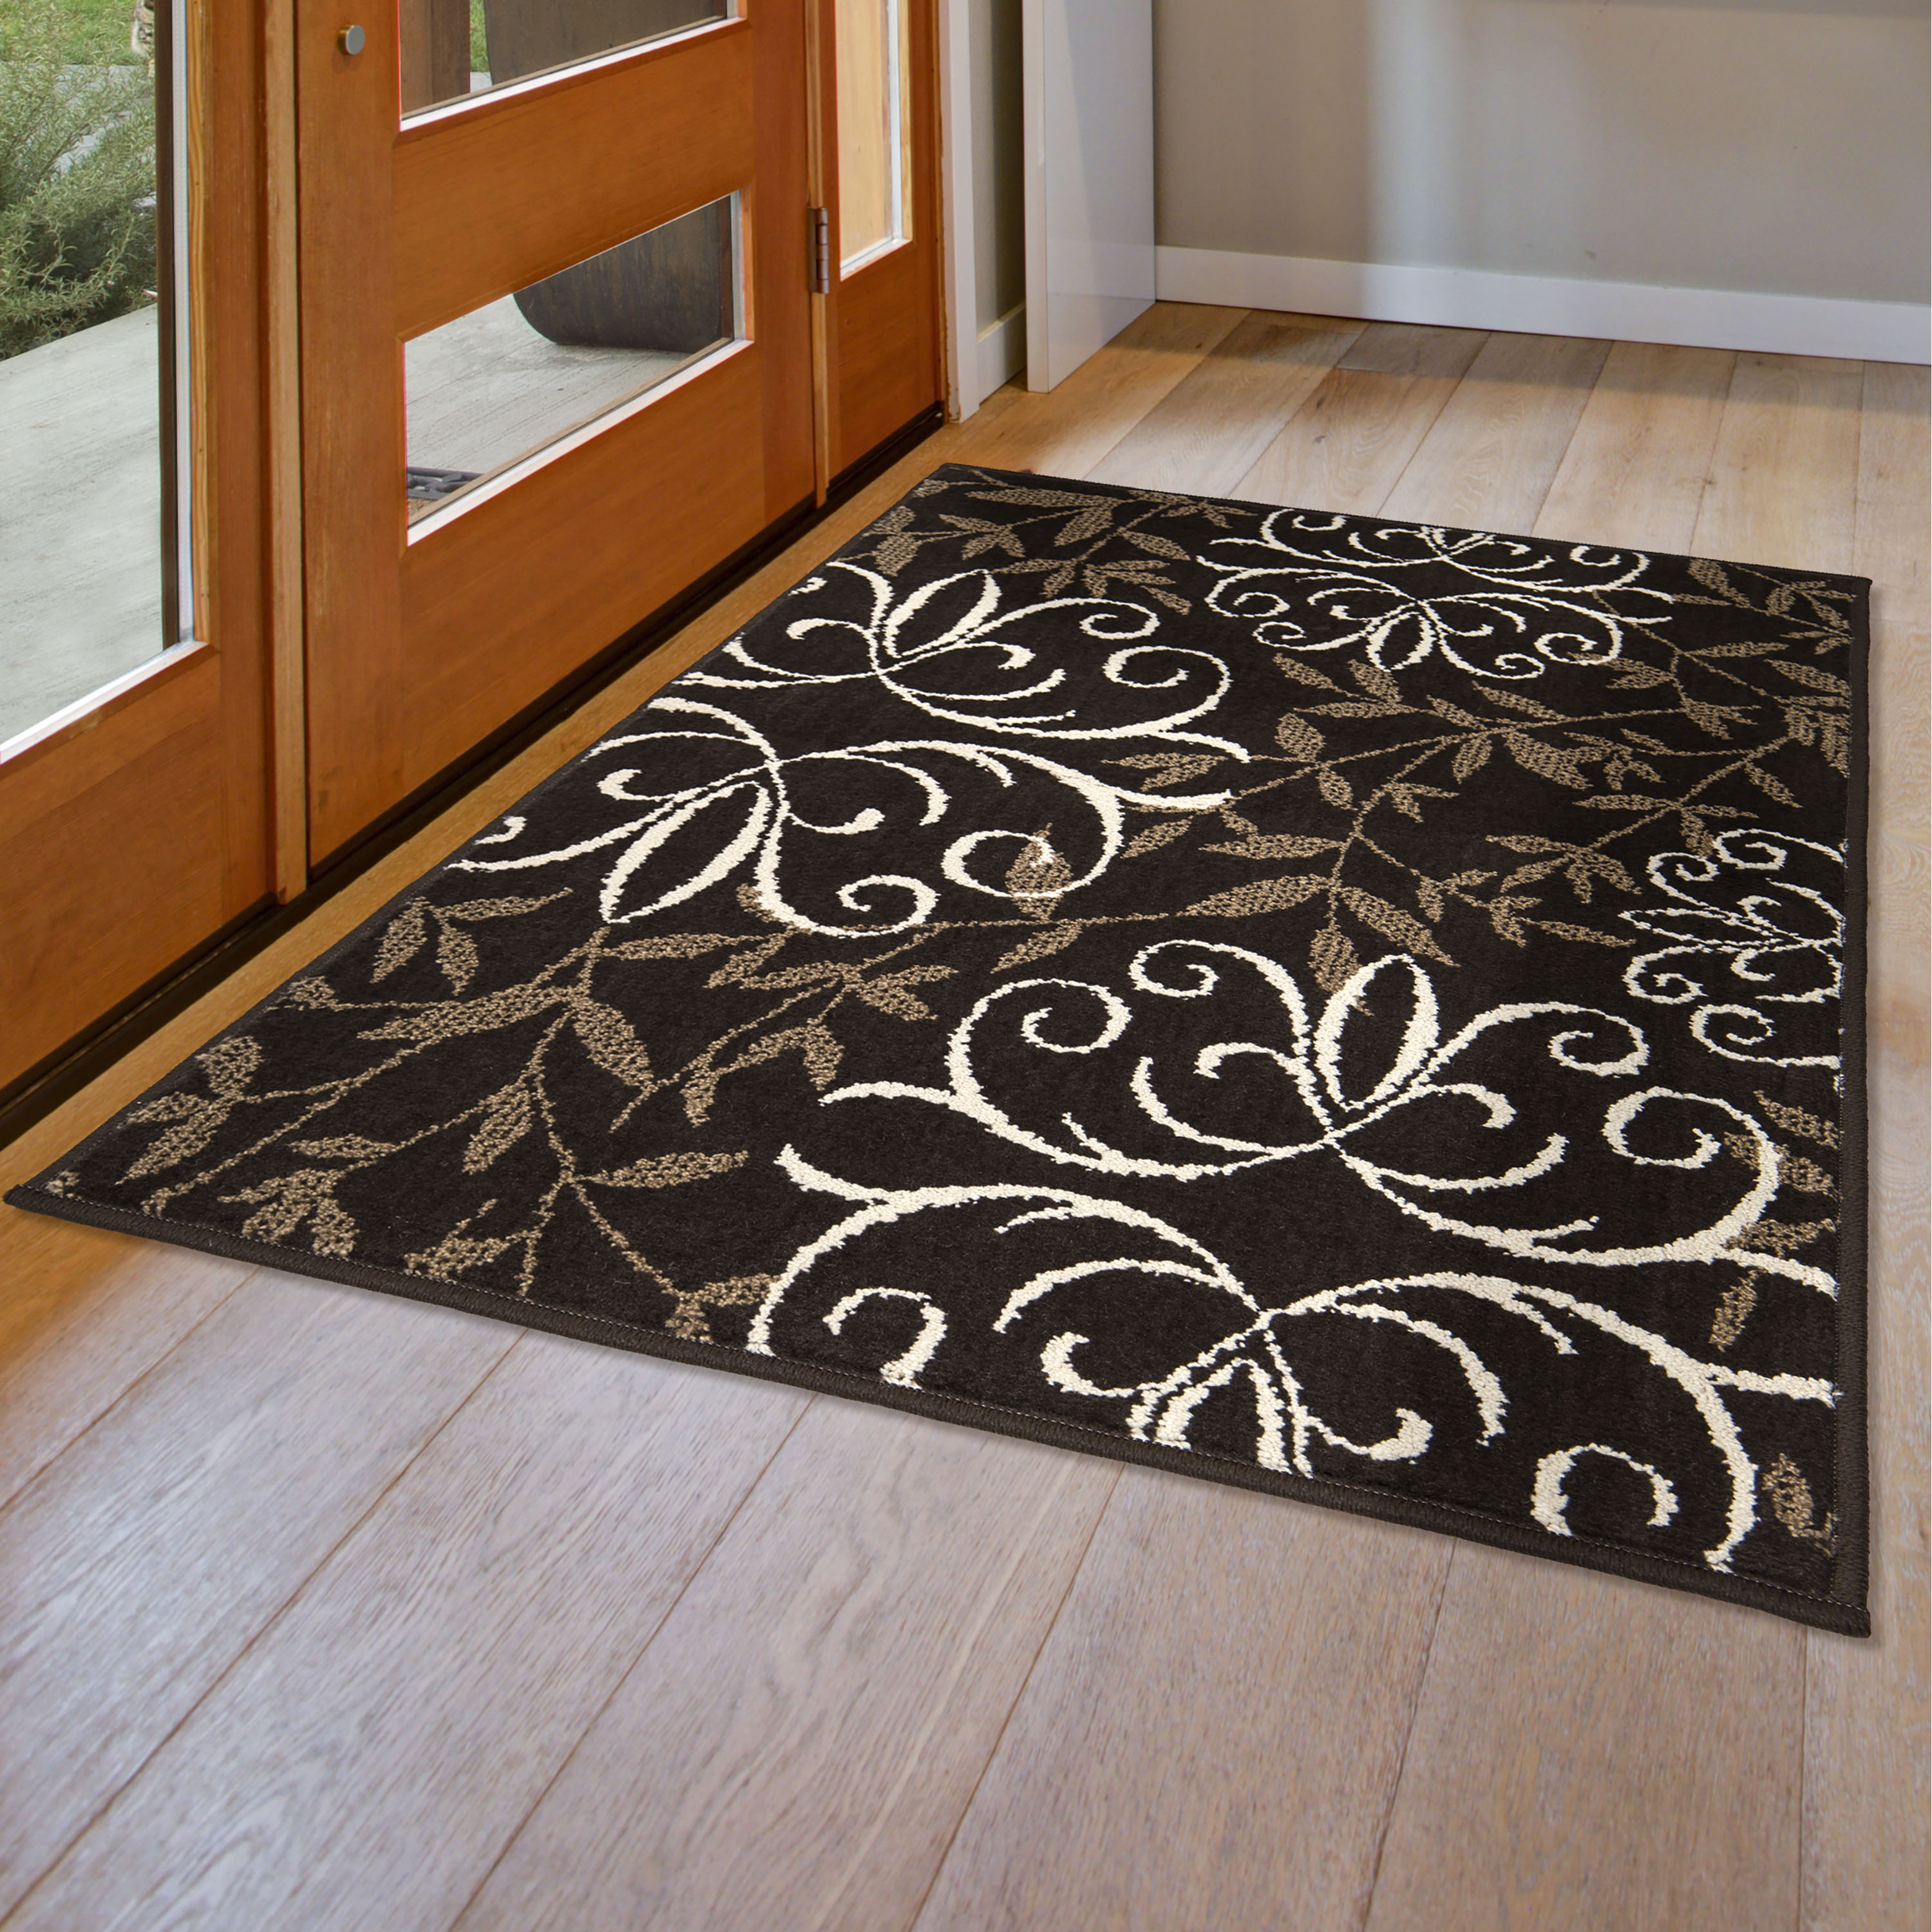 Better Homes & Gardens Iron Fleur Area Rug, Brown, 2'6" x 3'8" - image 1 of 9